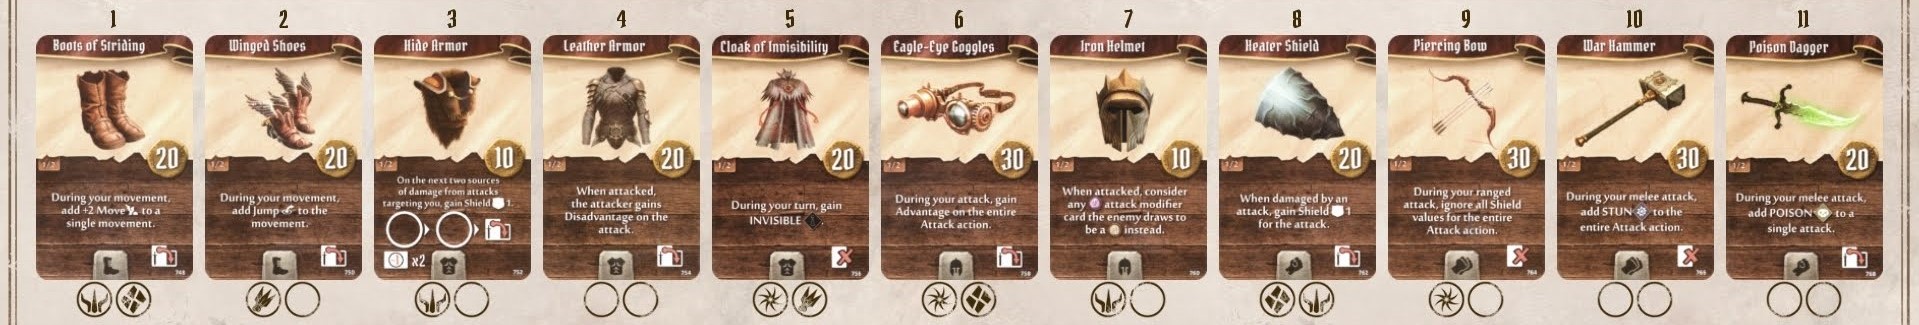 for iphone download Gloomhaven